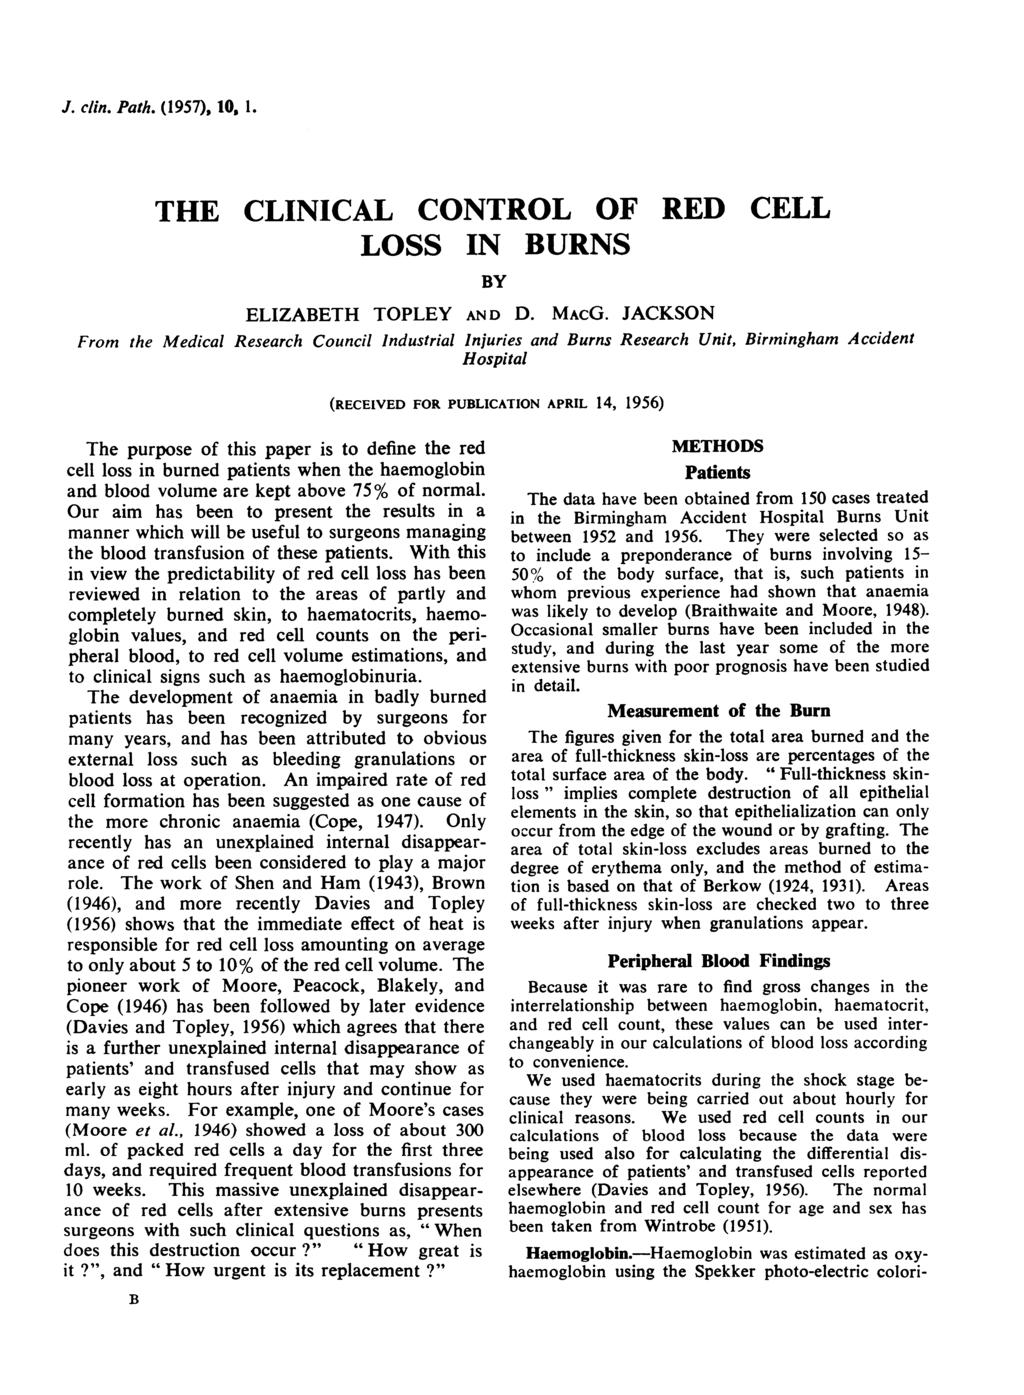 J. clin. Pth. (1957), 1, 1. From the THE CLINICAL CONTROL OF RED CELL LOSS IN BURNS BY Medicl ELIZABETH TOPLEY AN D D. MAcG.